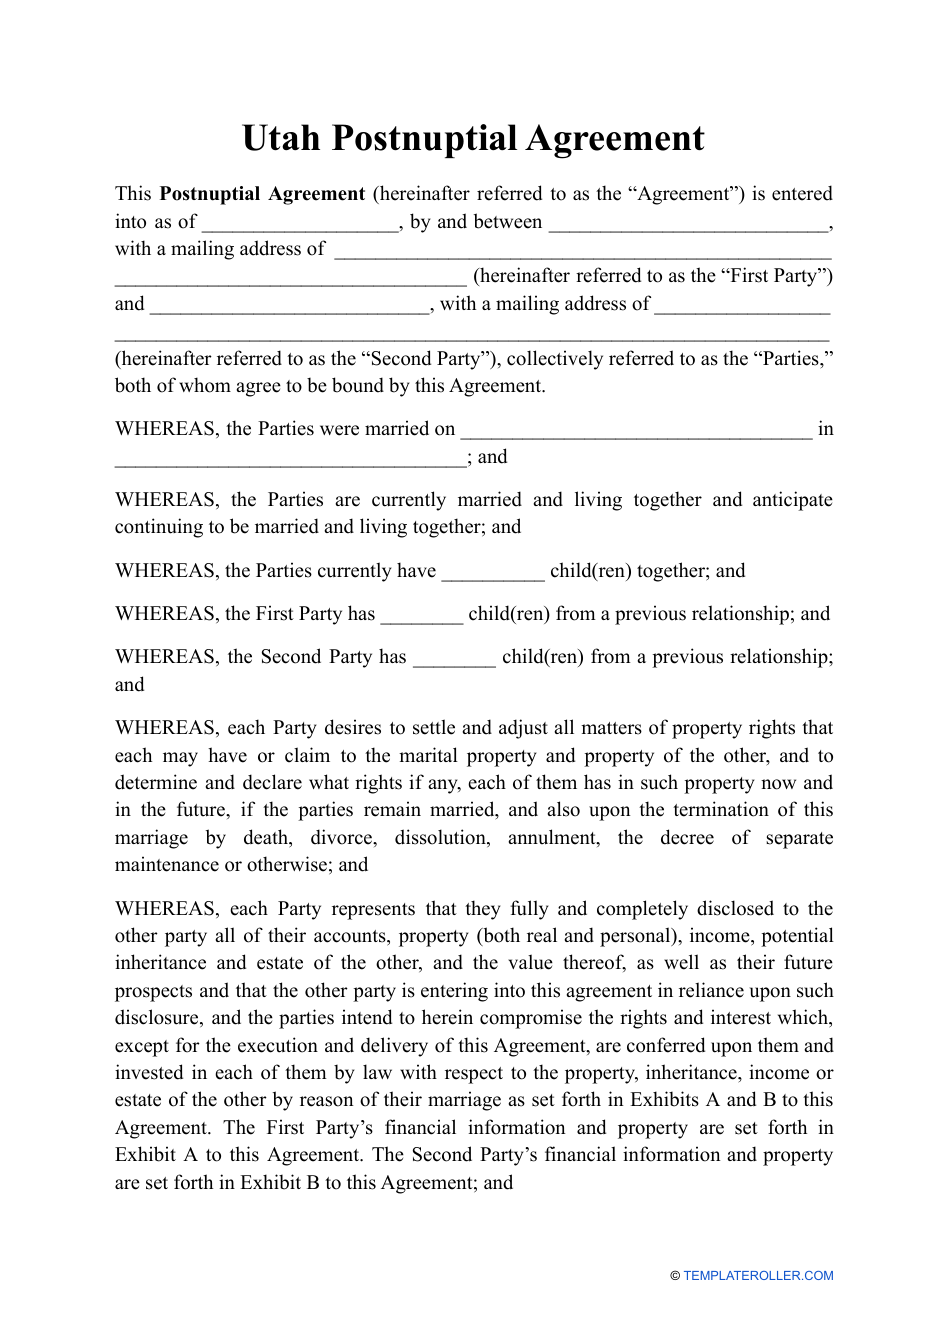 utah-postnuptial-agreement-template-fill-out-sign-online-and